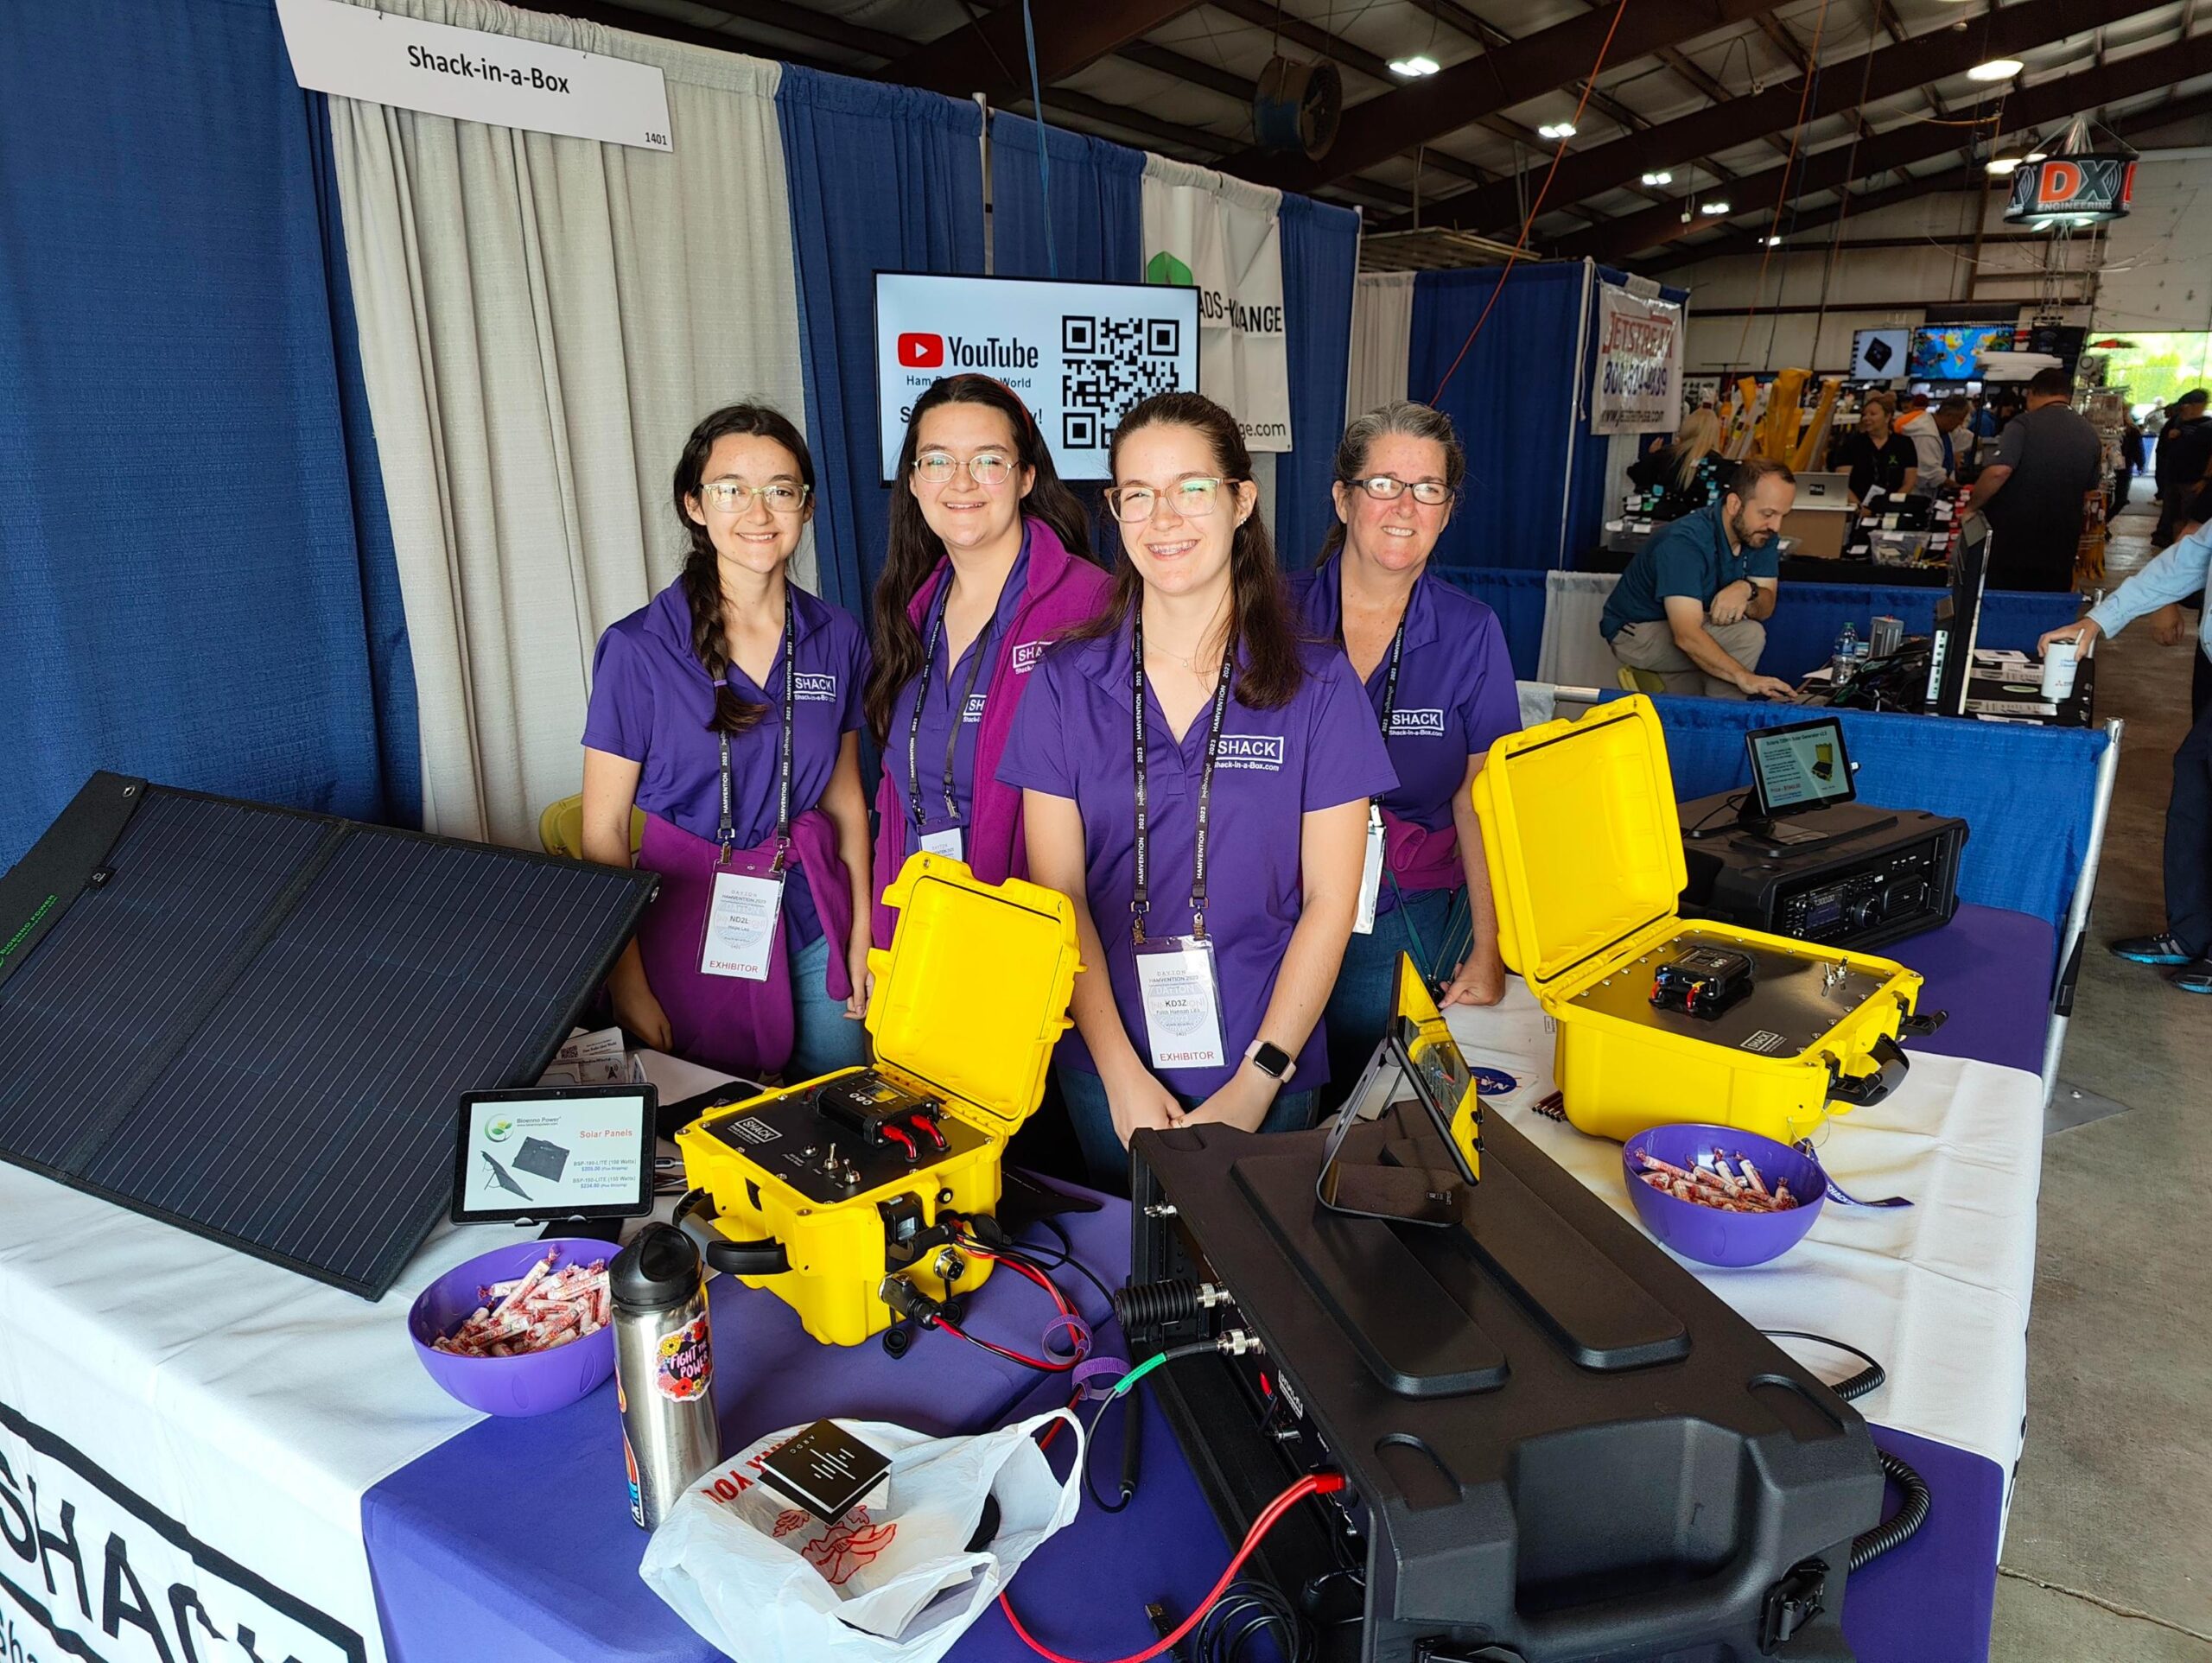 The Lea family of Shack-in-a-Box (L to R): Hope (ND2L), Grace (KE3G), and Faith Hannah (KD3Z) with their mother Michelle (N8ZQZ) at Hamvention 2023